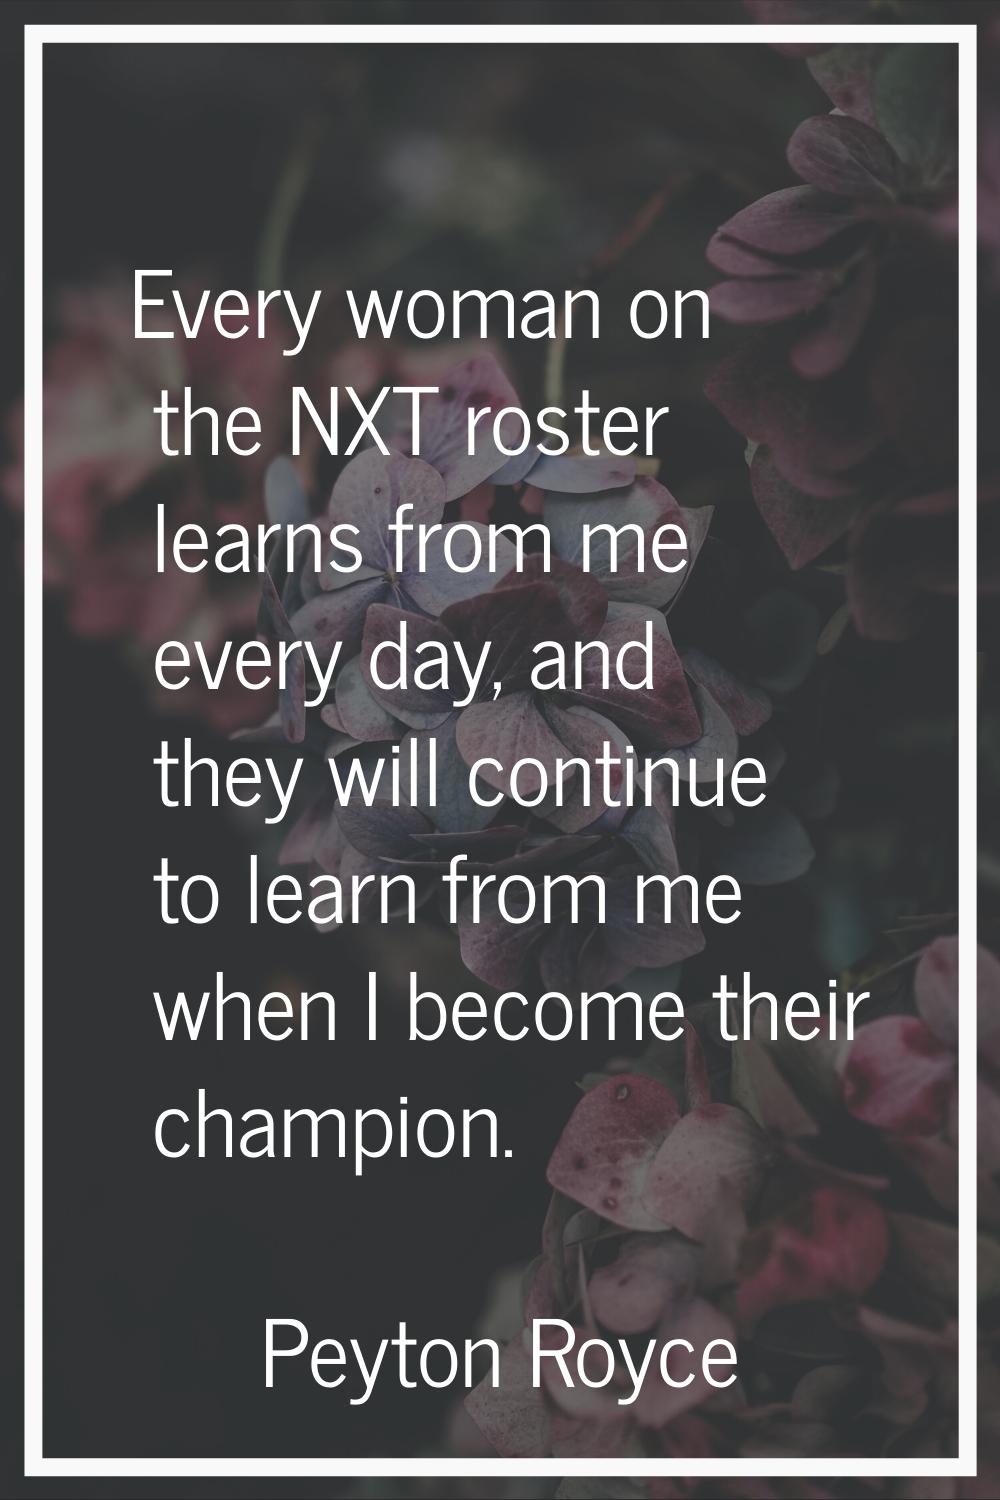 Every woman on the NXT roster learns from me every day, and they will continue to learn from me whe